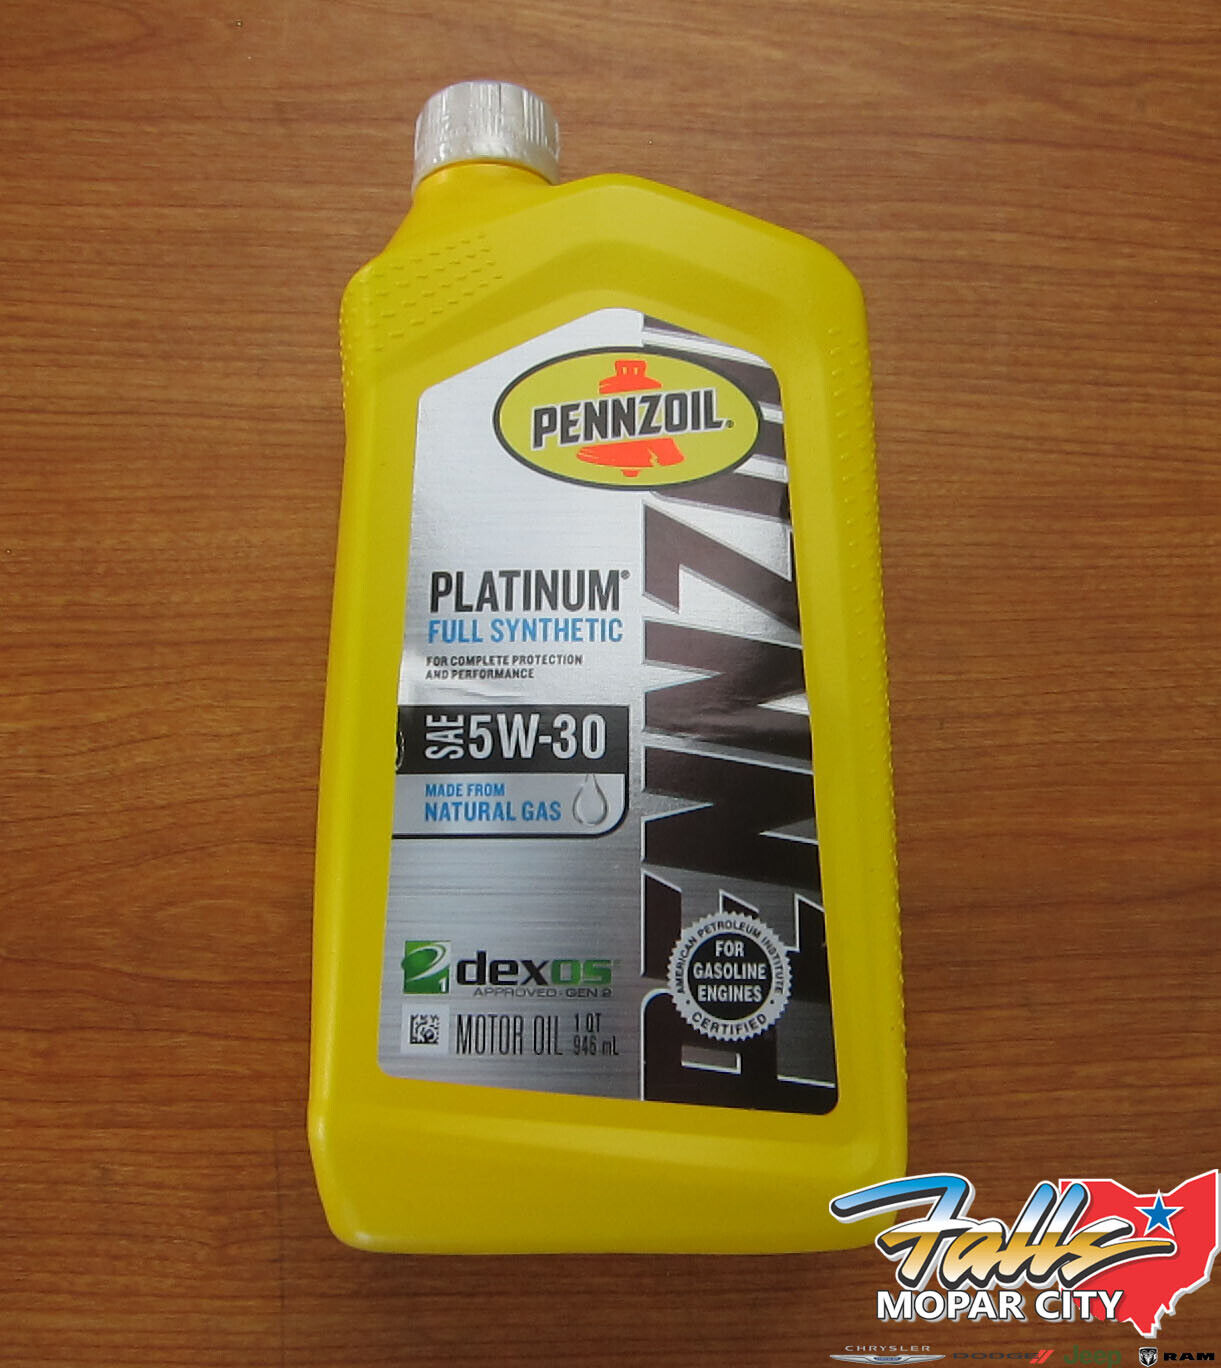 One Quart of Pennzoil SAE Platinum Full Synthetic 5W-30 Oil From Natural Gas